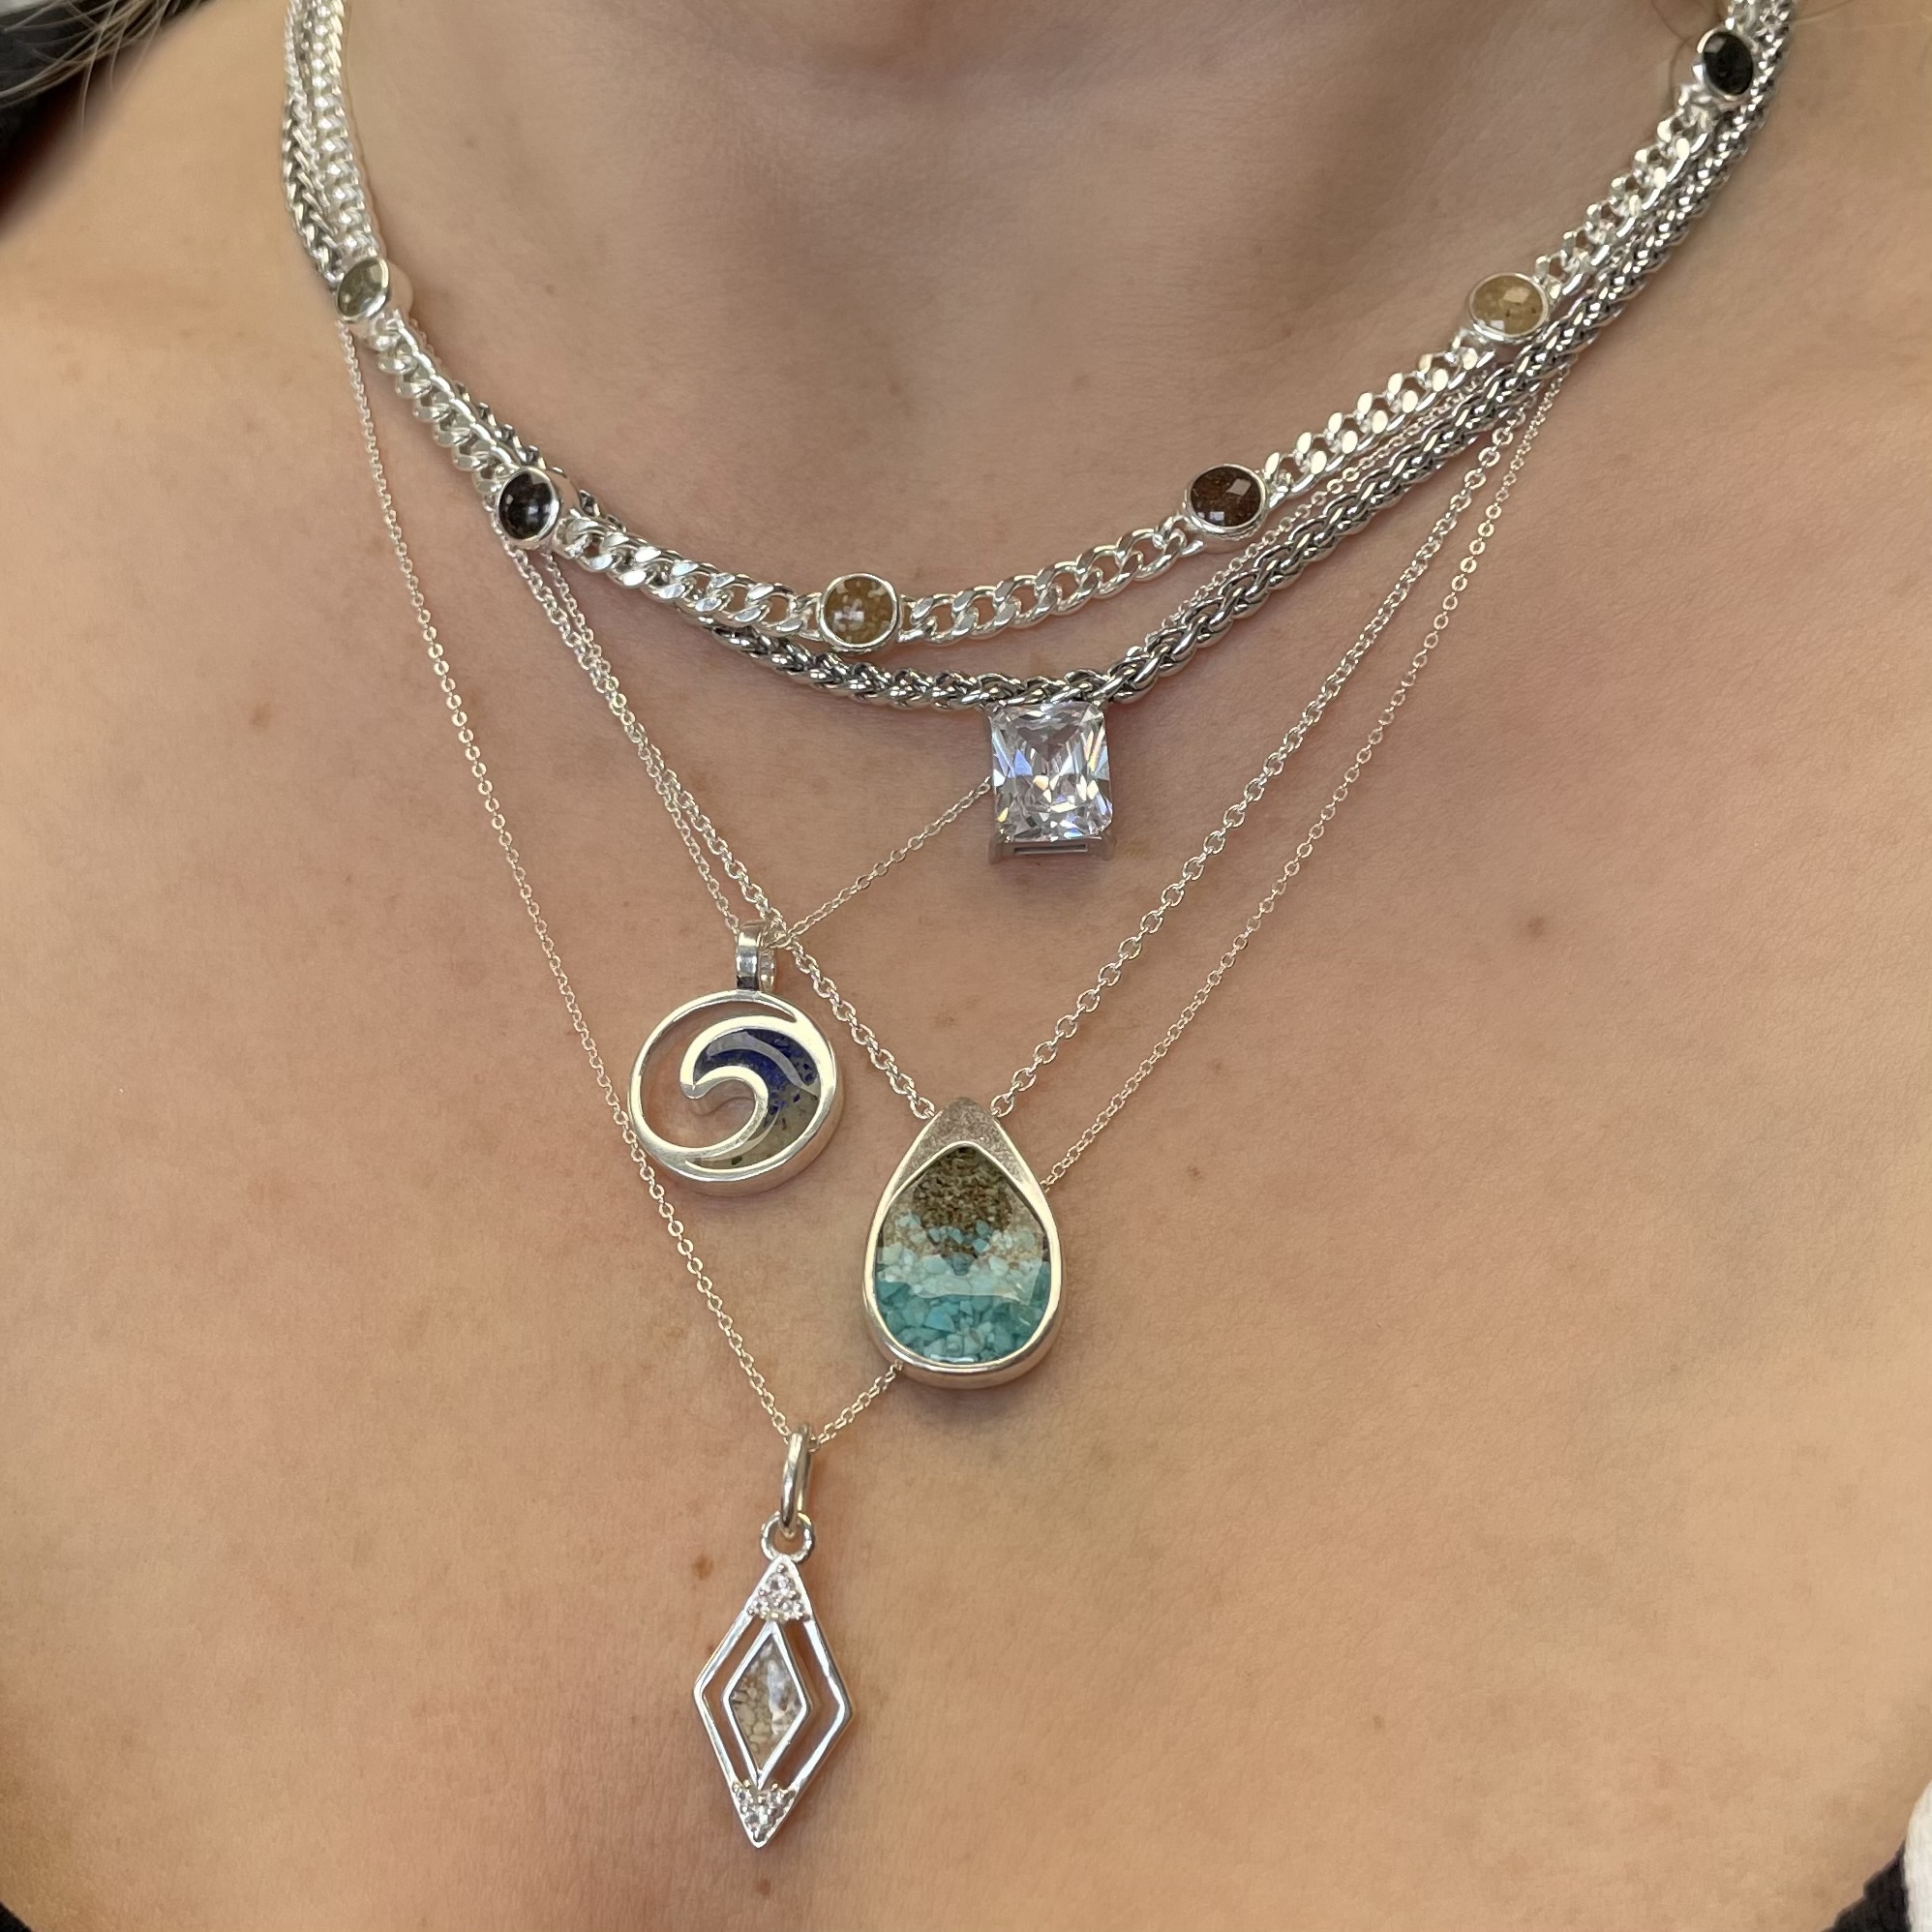 Sterling silver necklaces from Mi Tesoro and Dune Jewelry layered on neck, close-up.